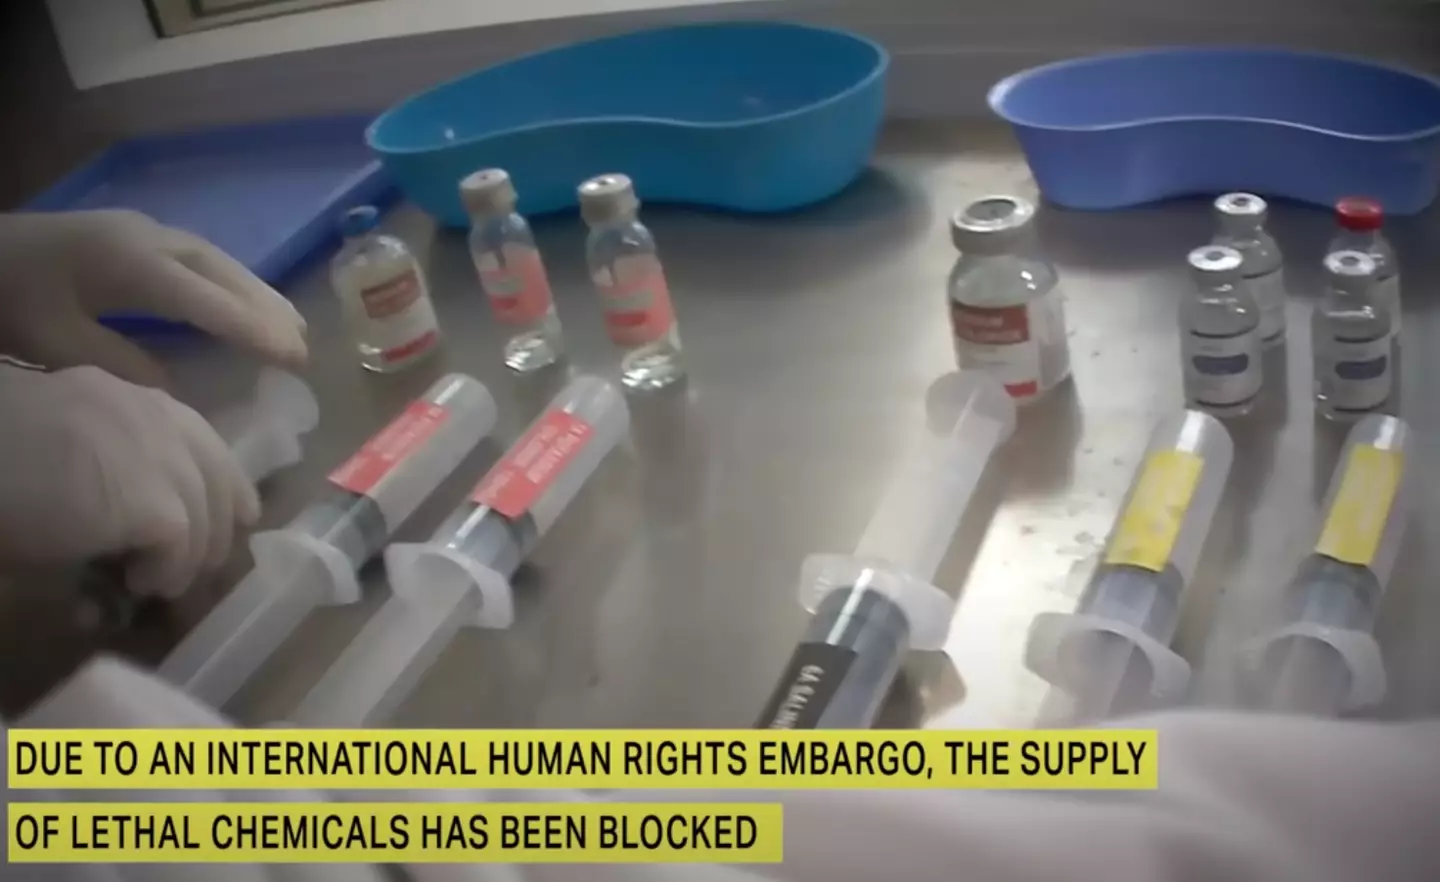 An international human rights embargo has seen the supply of lethal chemicals blocked.